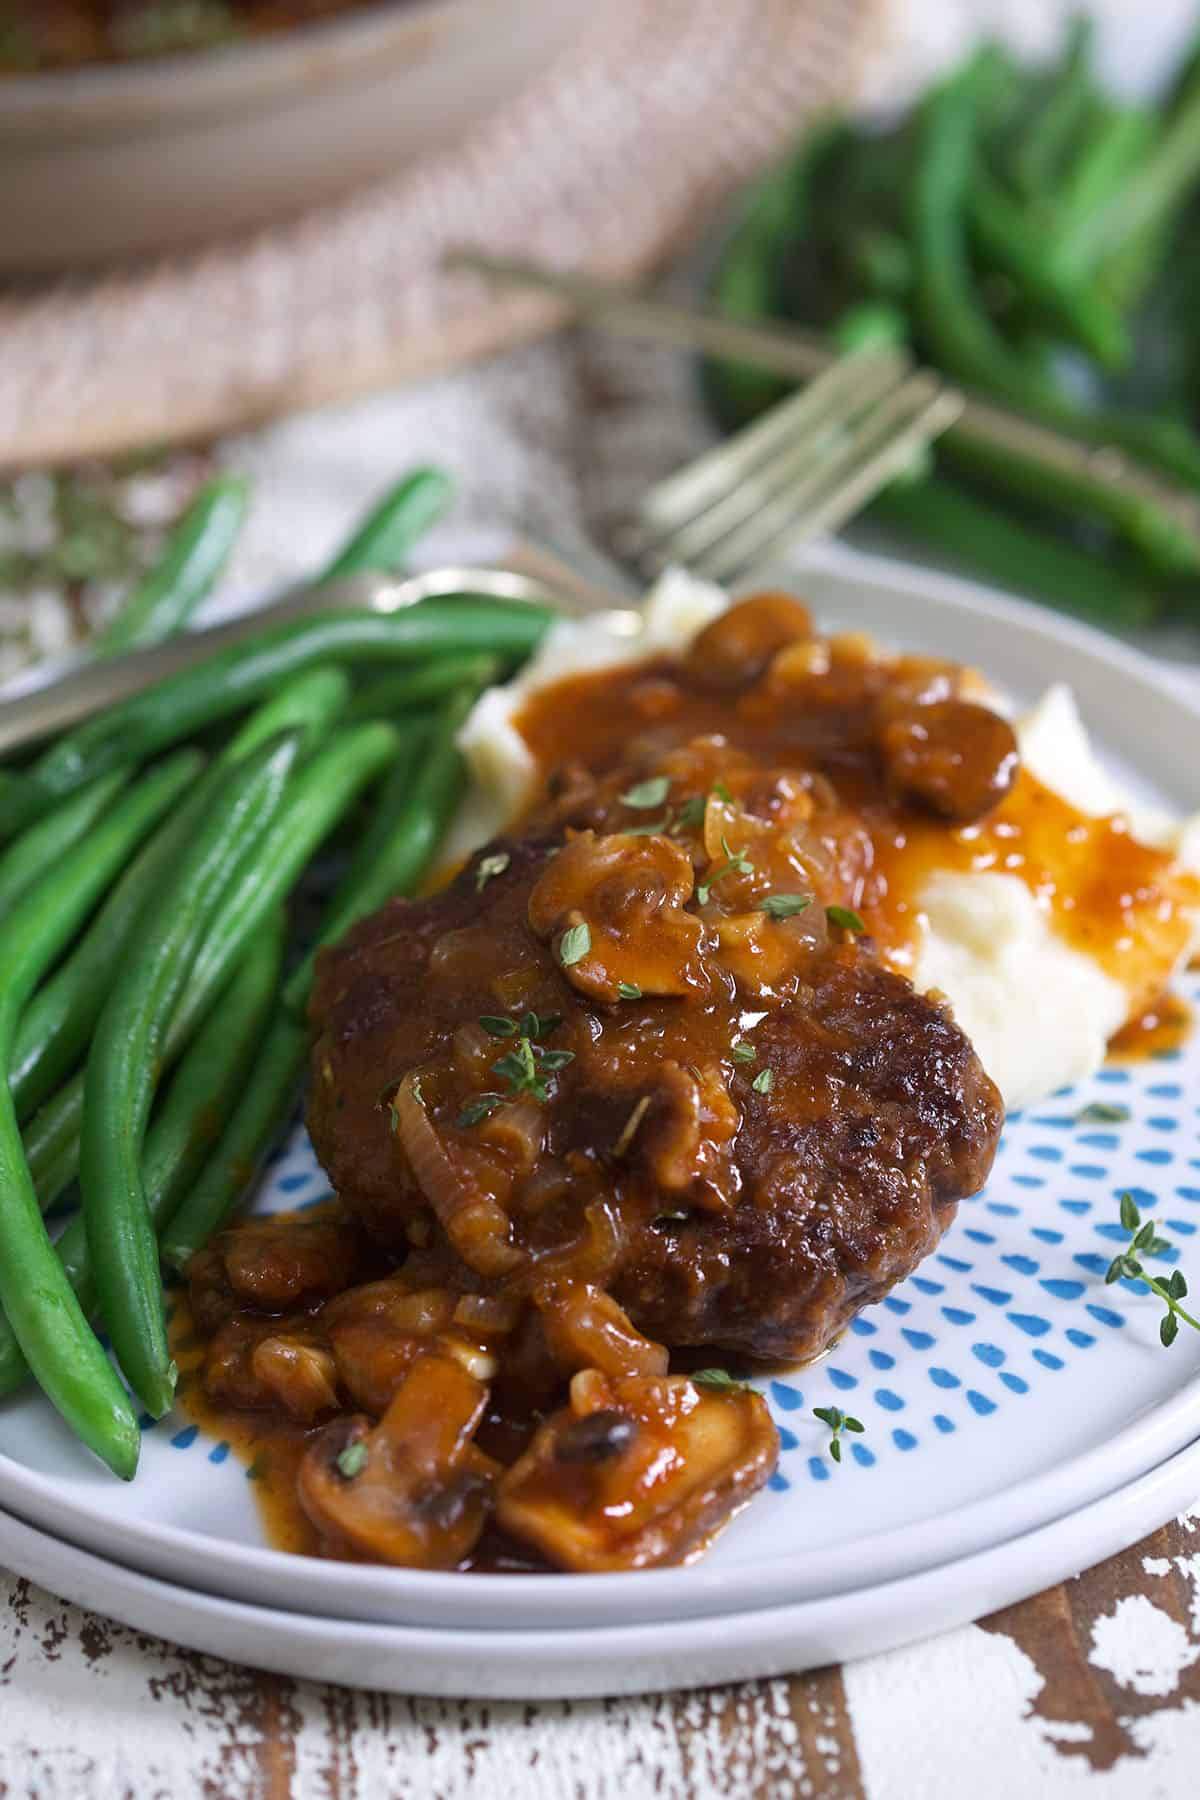 Gravy is drizzled across a hamburger steak on a blue and white plate.